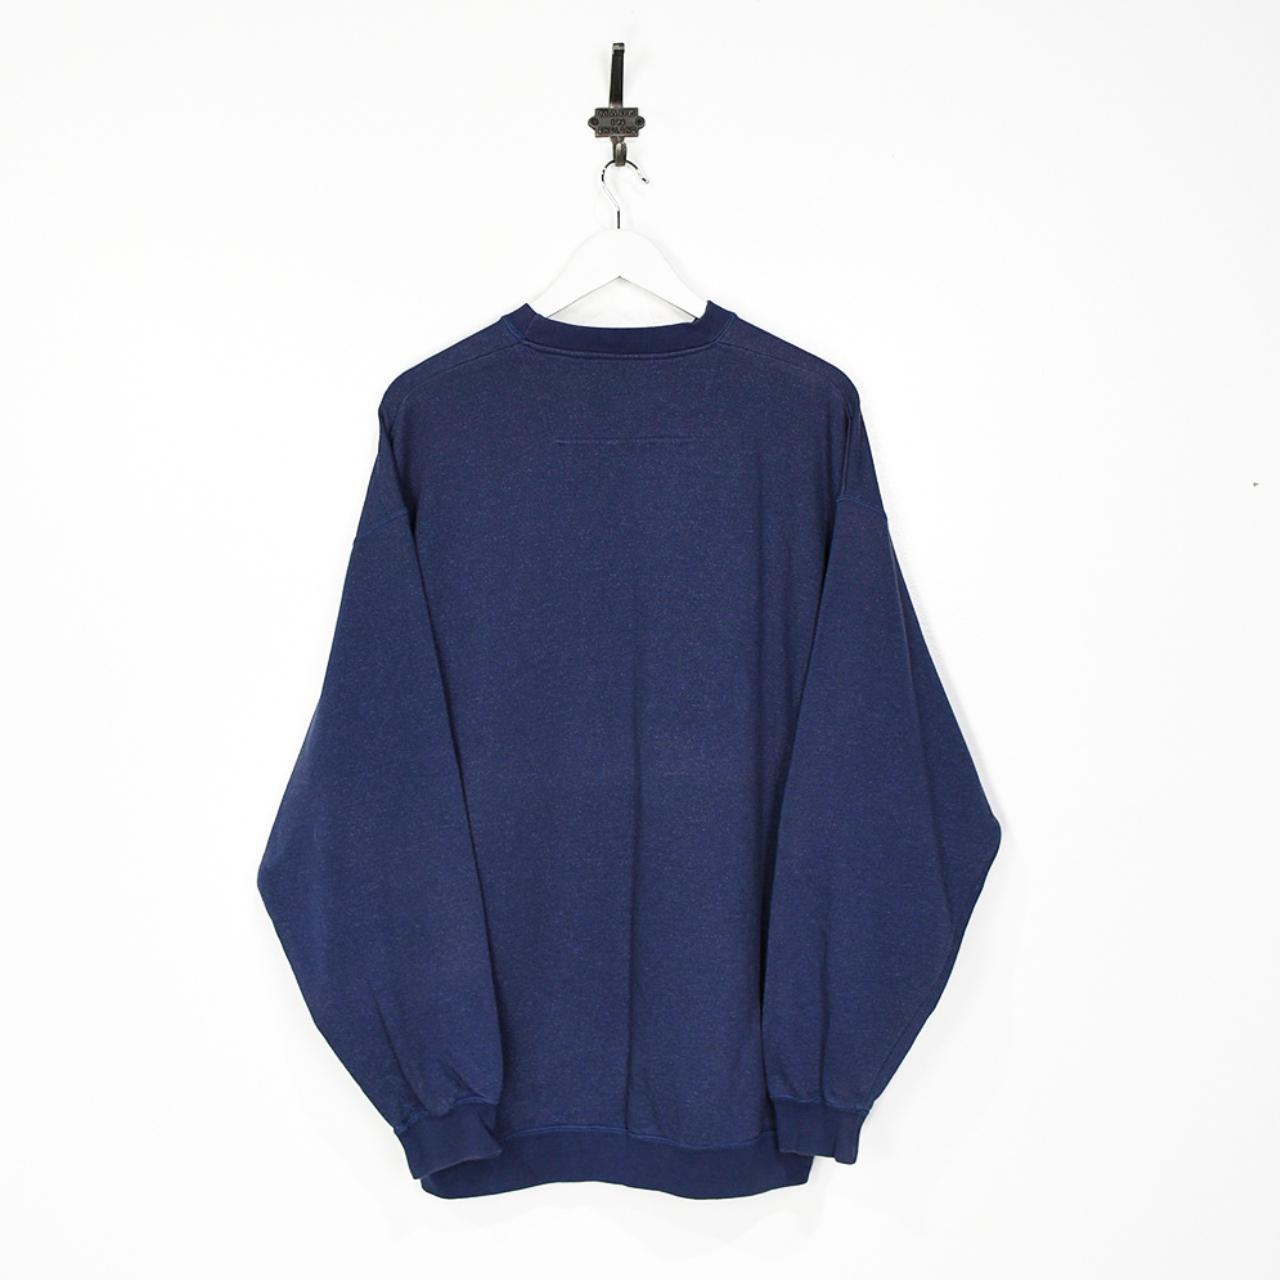 Product Image 3 - Russell Athletic Sweatshirt

Condition:  Very